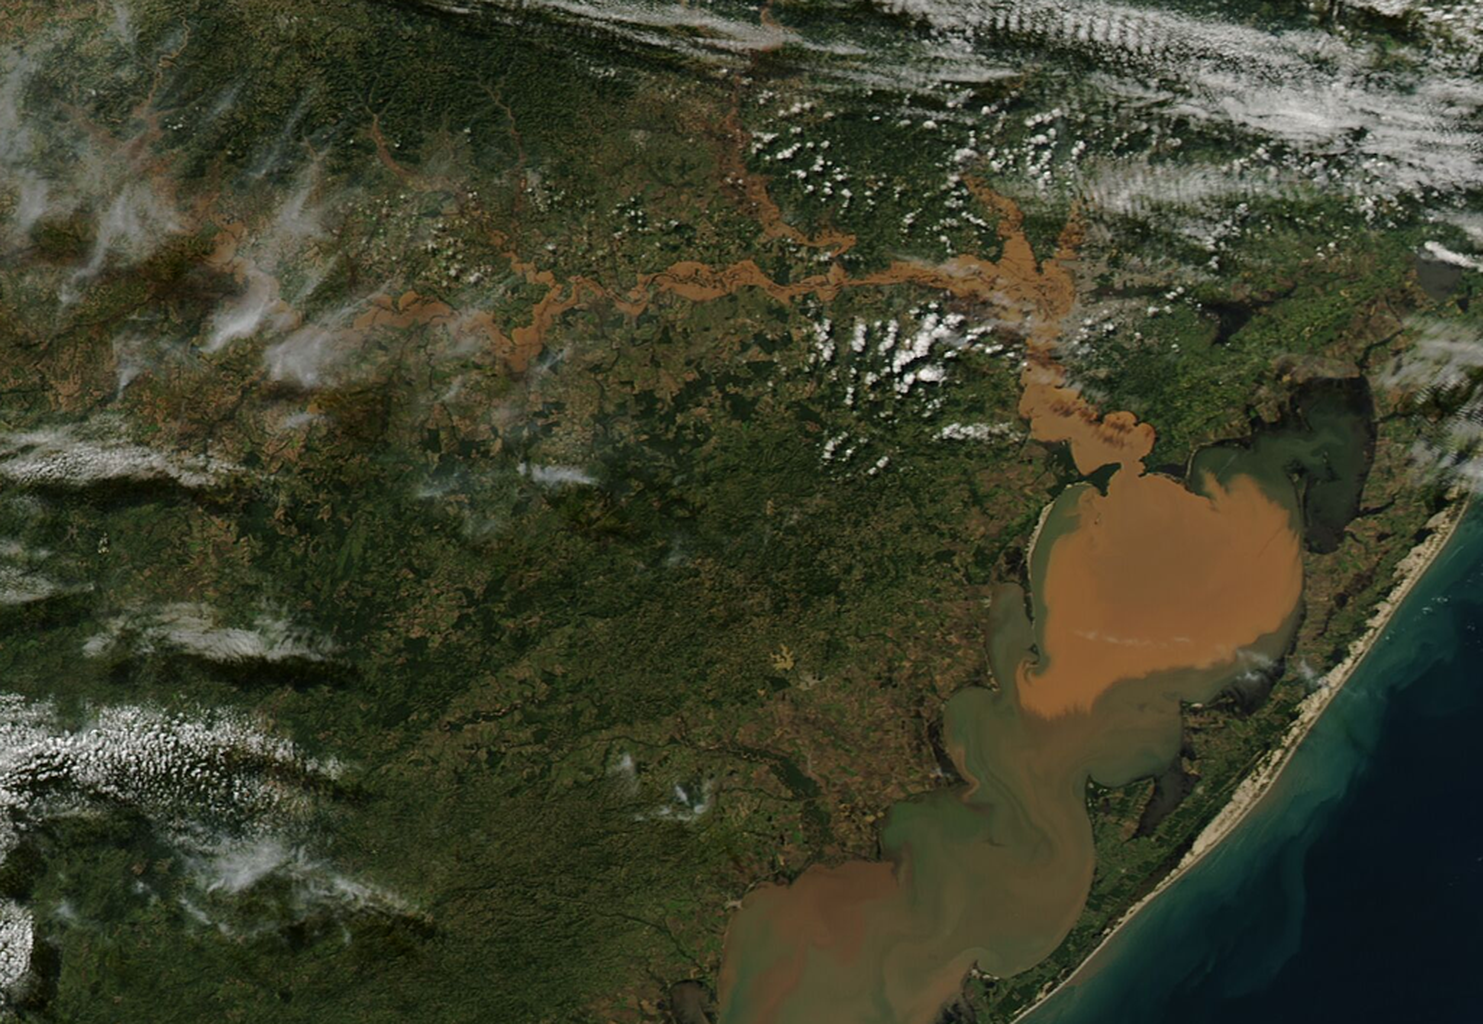 An image shows severe flooding in southern Brazil with muddy floodwater.